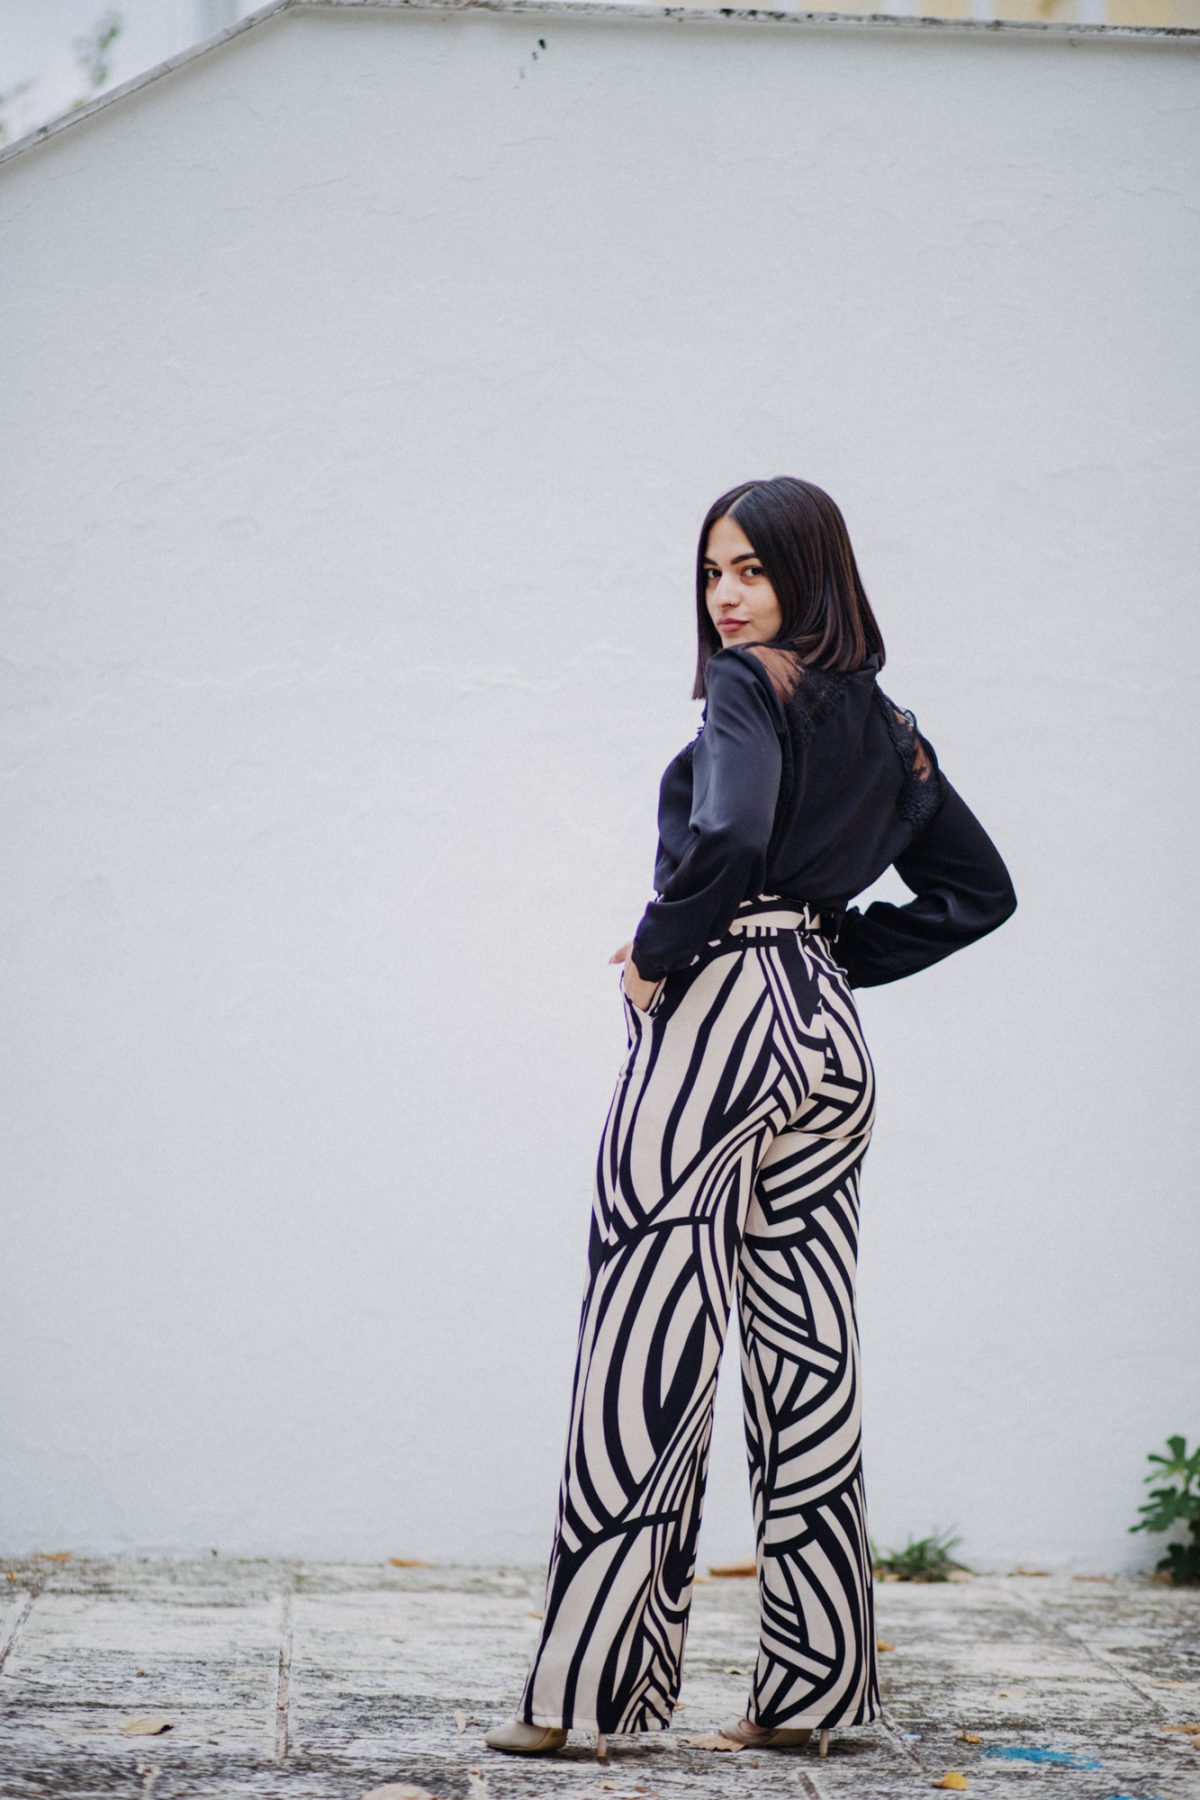 Culotte with Geometric Patterns